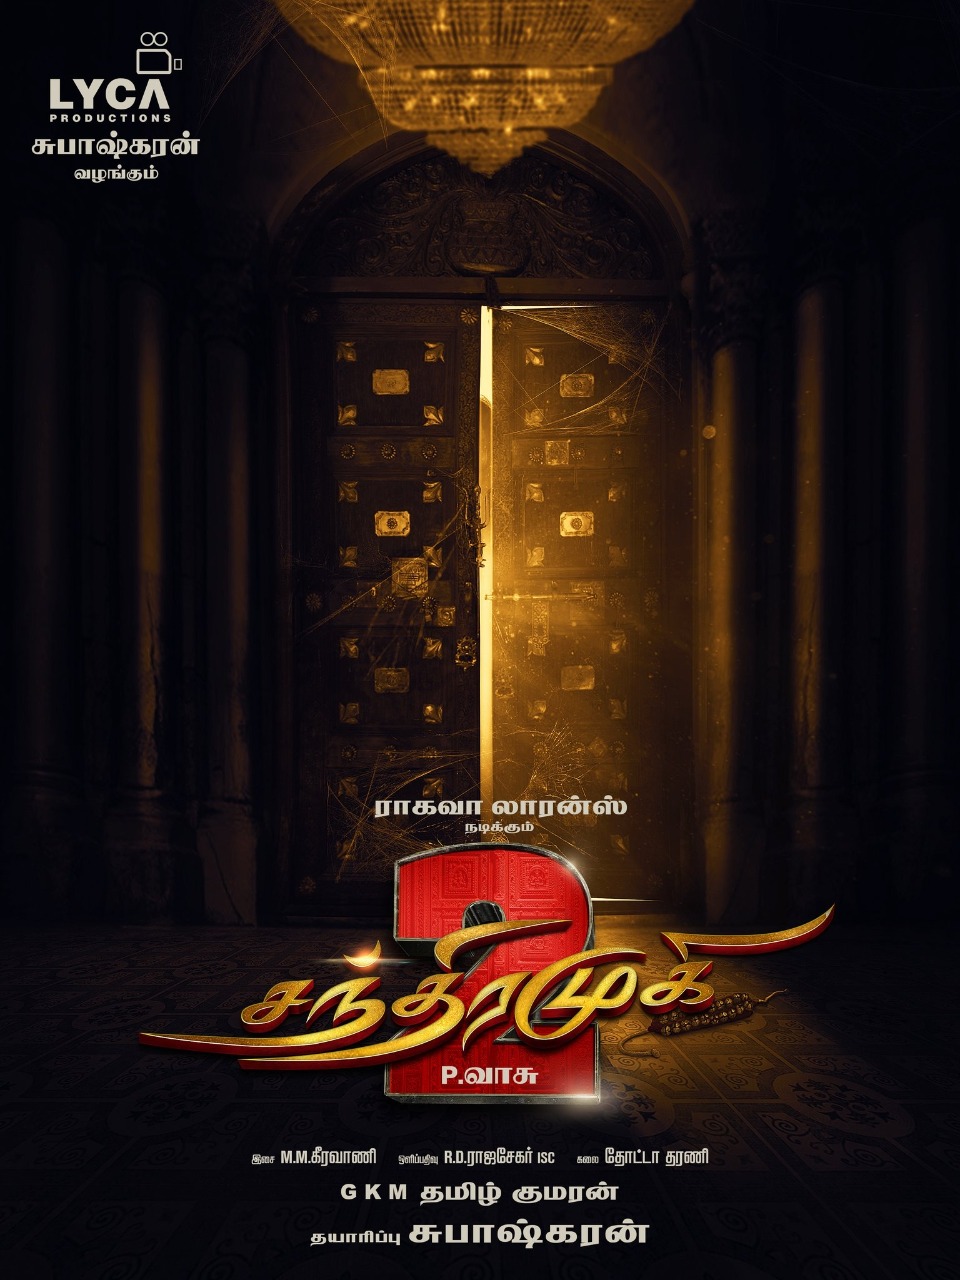 Lyca announced chandramukhi second part viral poster